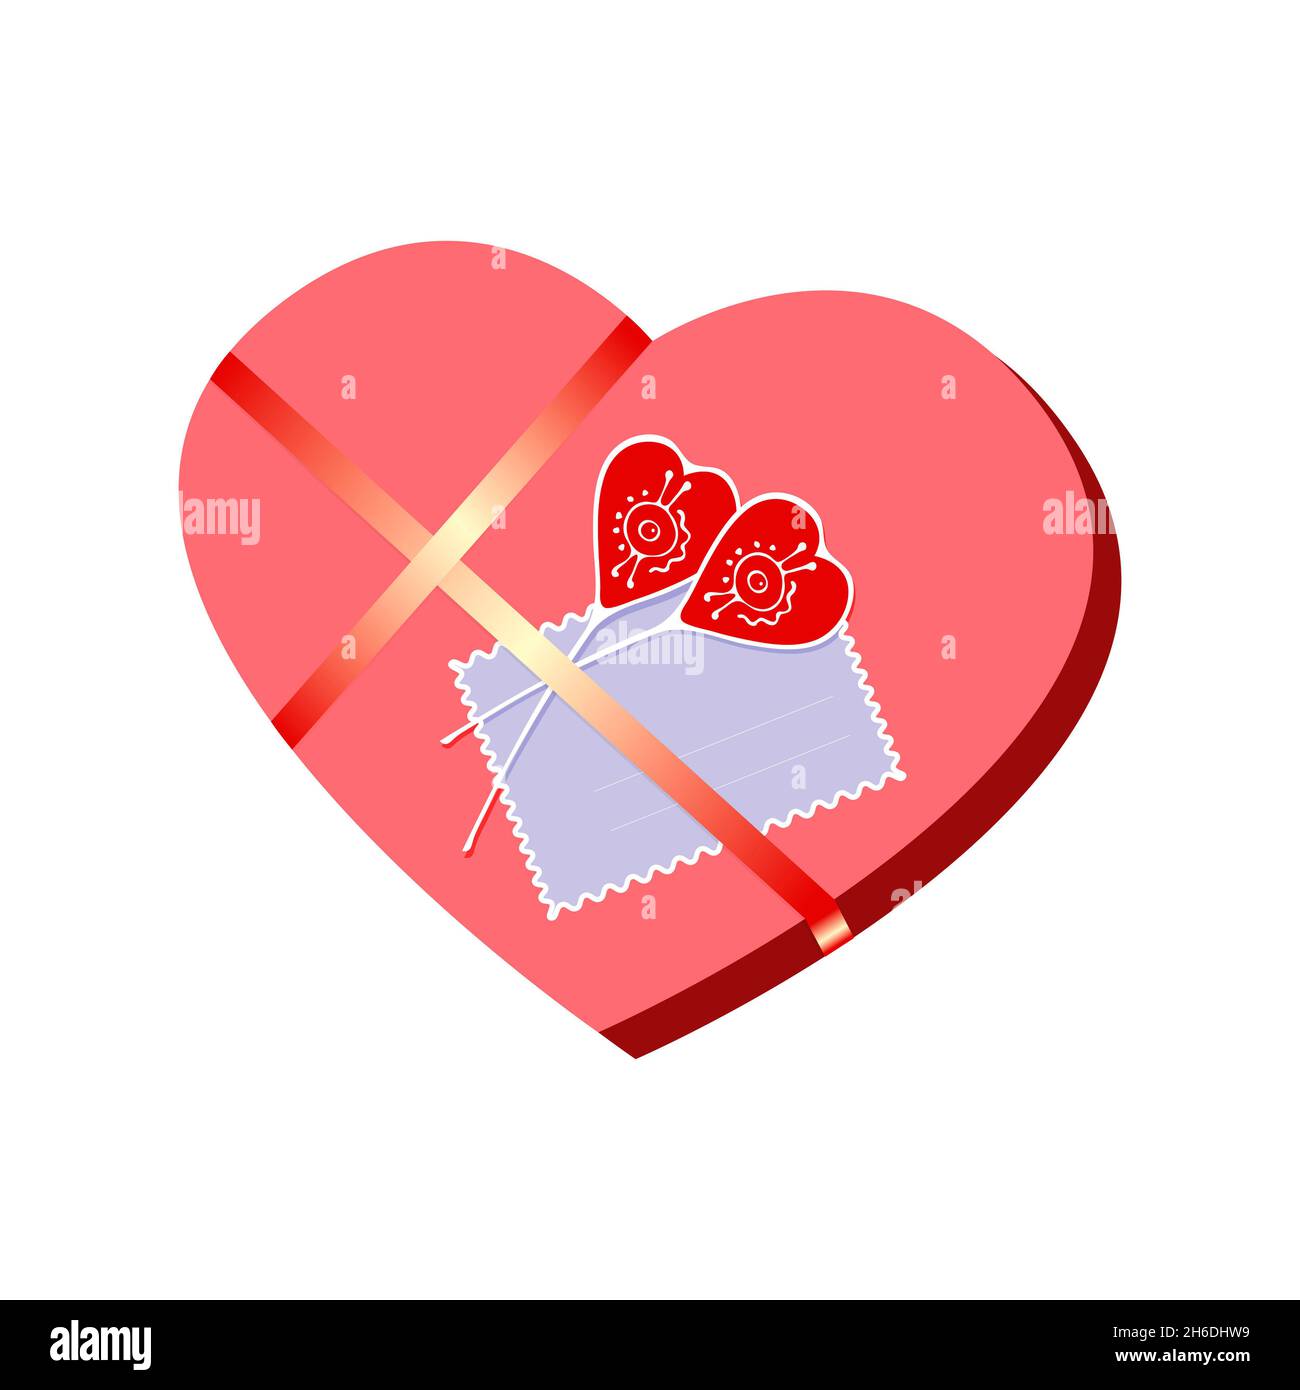 Gift present Valentines Day, Wedding, heart shaped box, ribbon, love, passion, heart doodle. Isolated. White background. Stock Photo